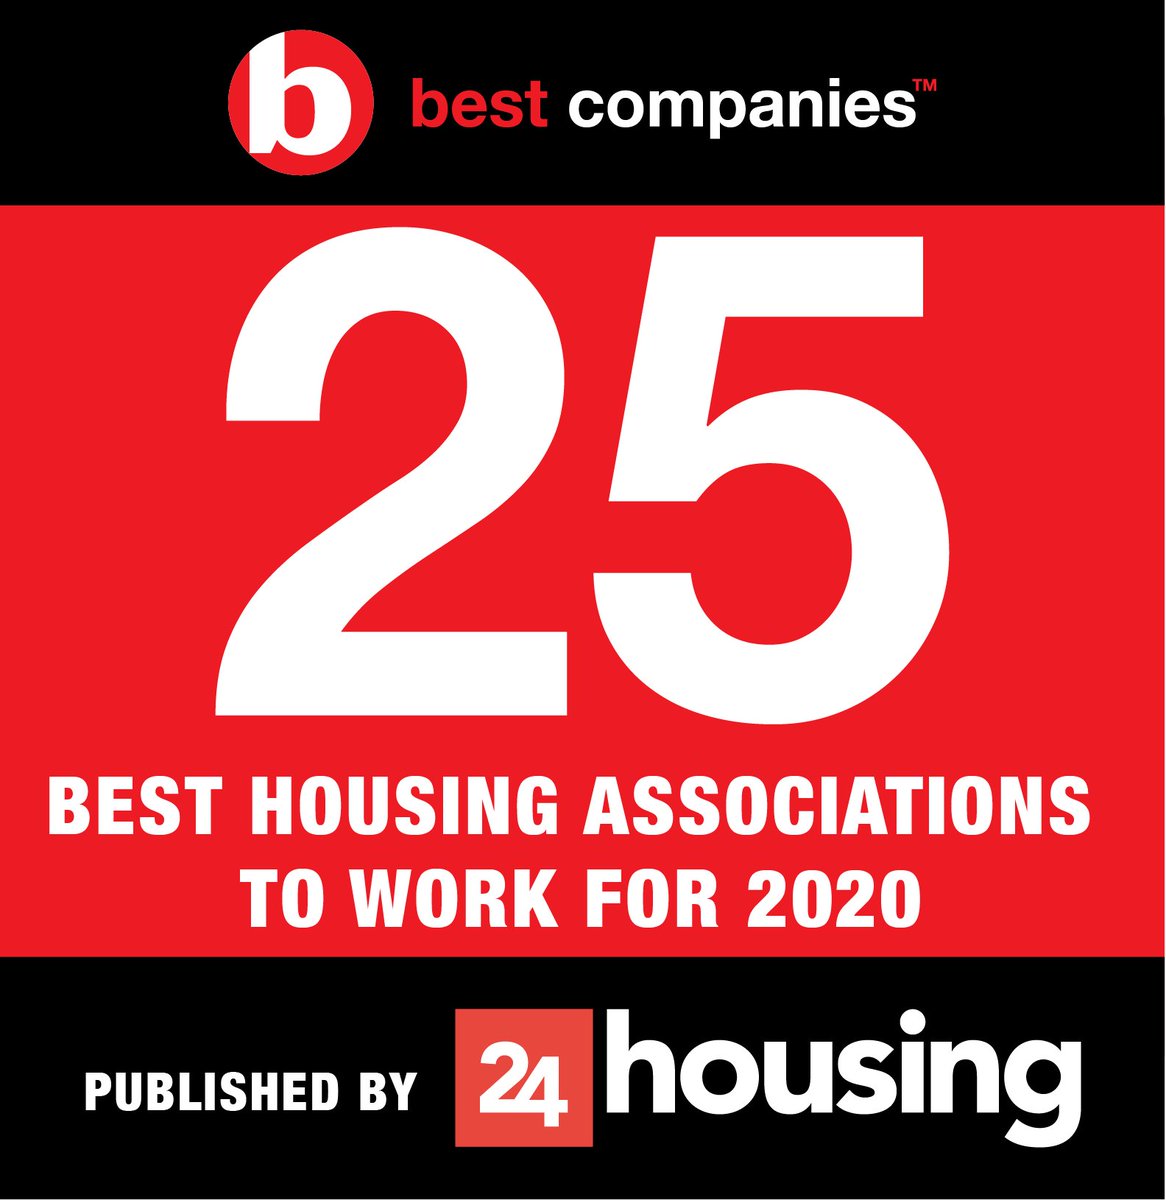 Great to be at no.18 in @24housing top 25 housing associations to work for b.co.uk/the-lists/hous… #bestcompanies2020